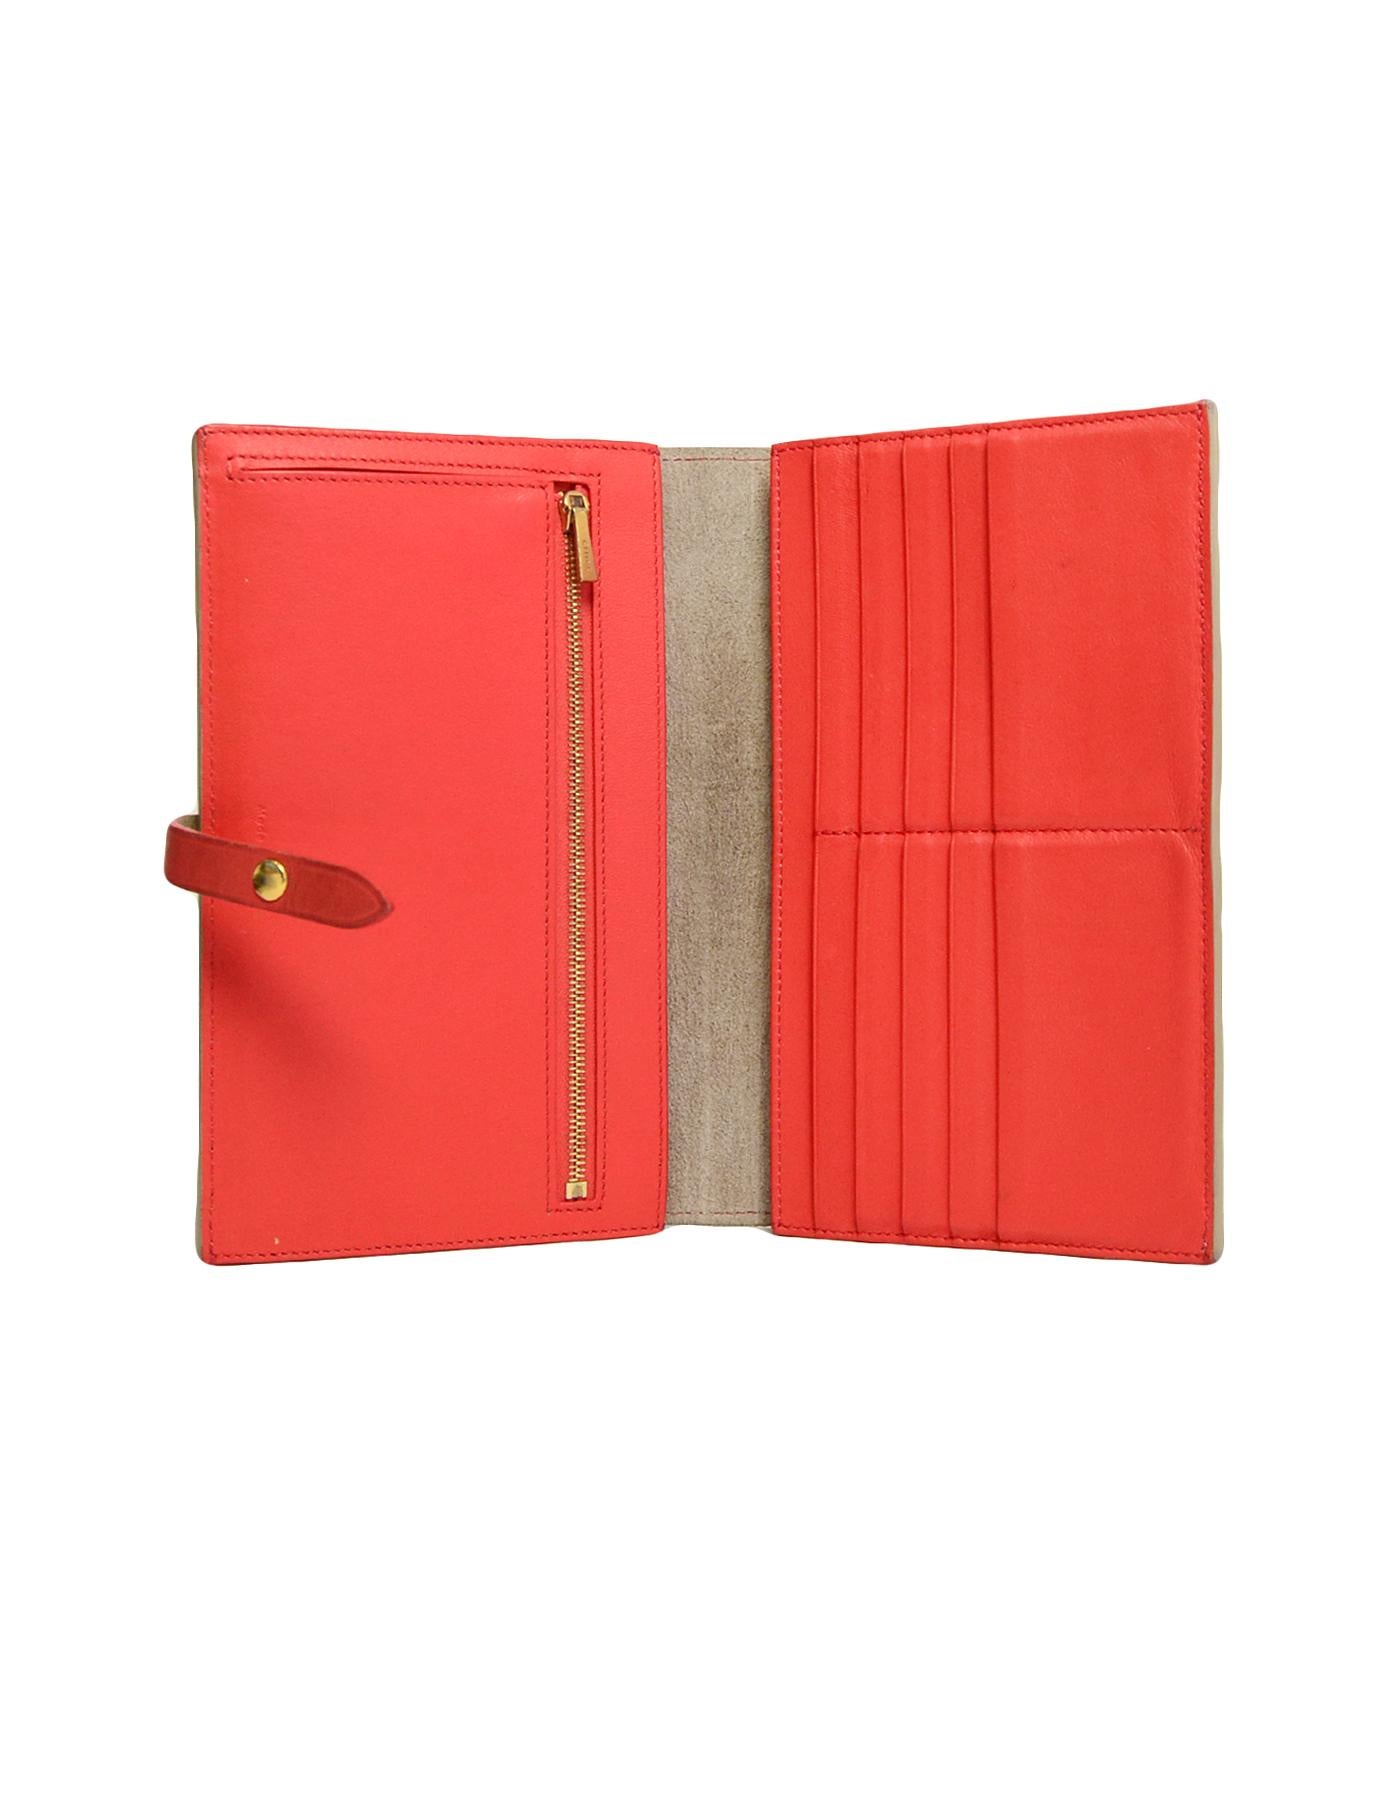 Celine Taupe/Red Grained Calfskin Large Multifunction Strap Wallet rt $810 1